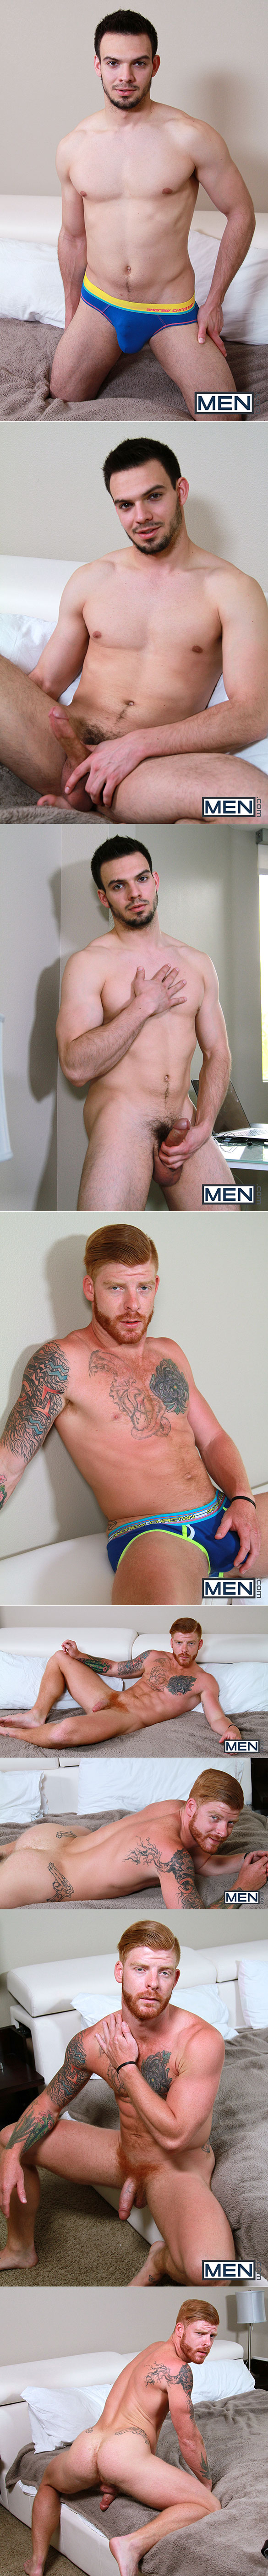 Men.com: Bennett Anthony bottoms for Jason Maddox in “Not Brothers Yet, Part 9”